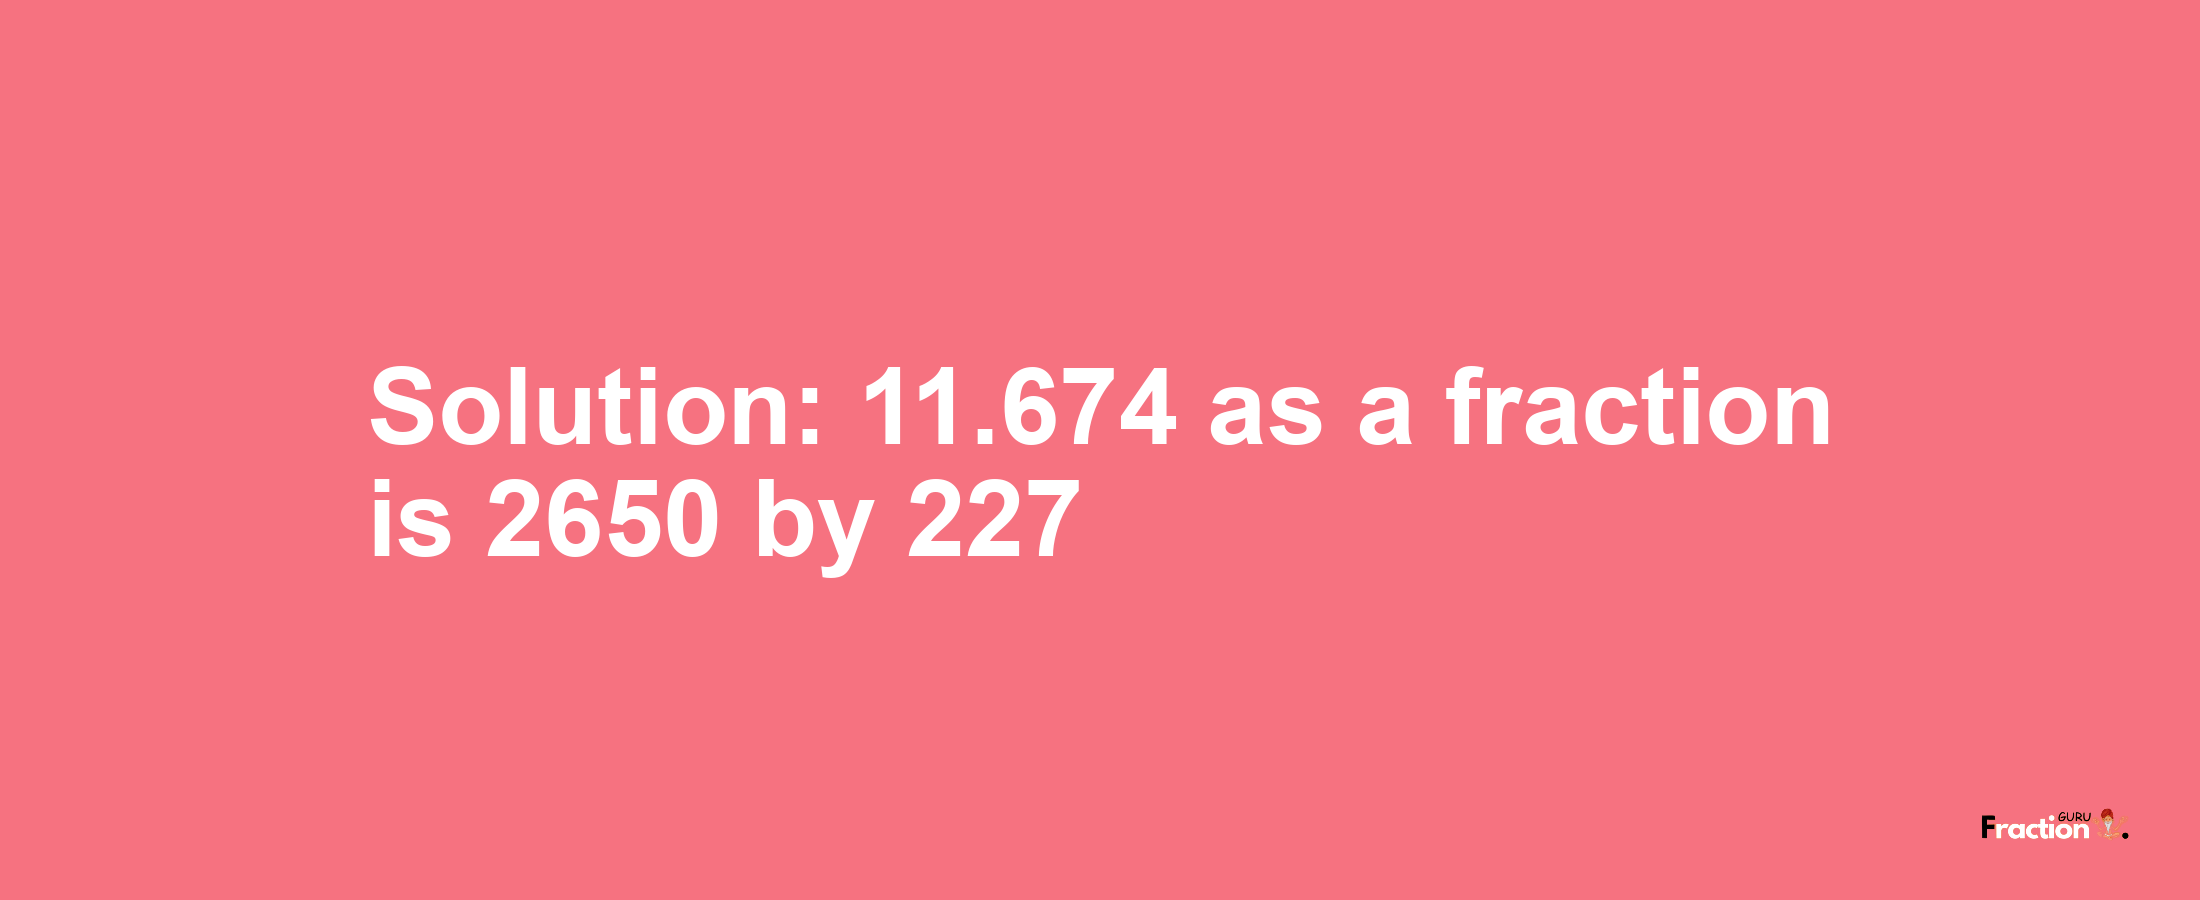 Solution:11.674 as a fraction is 2650/227